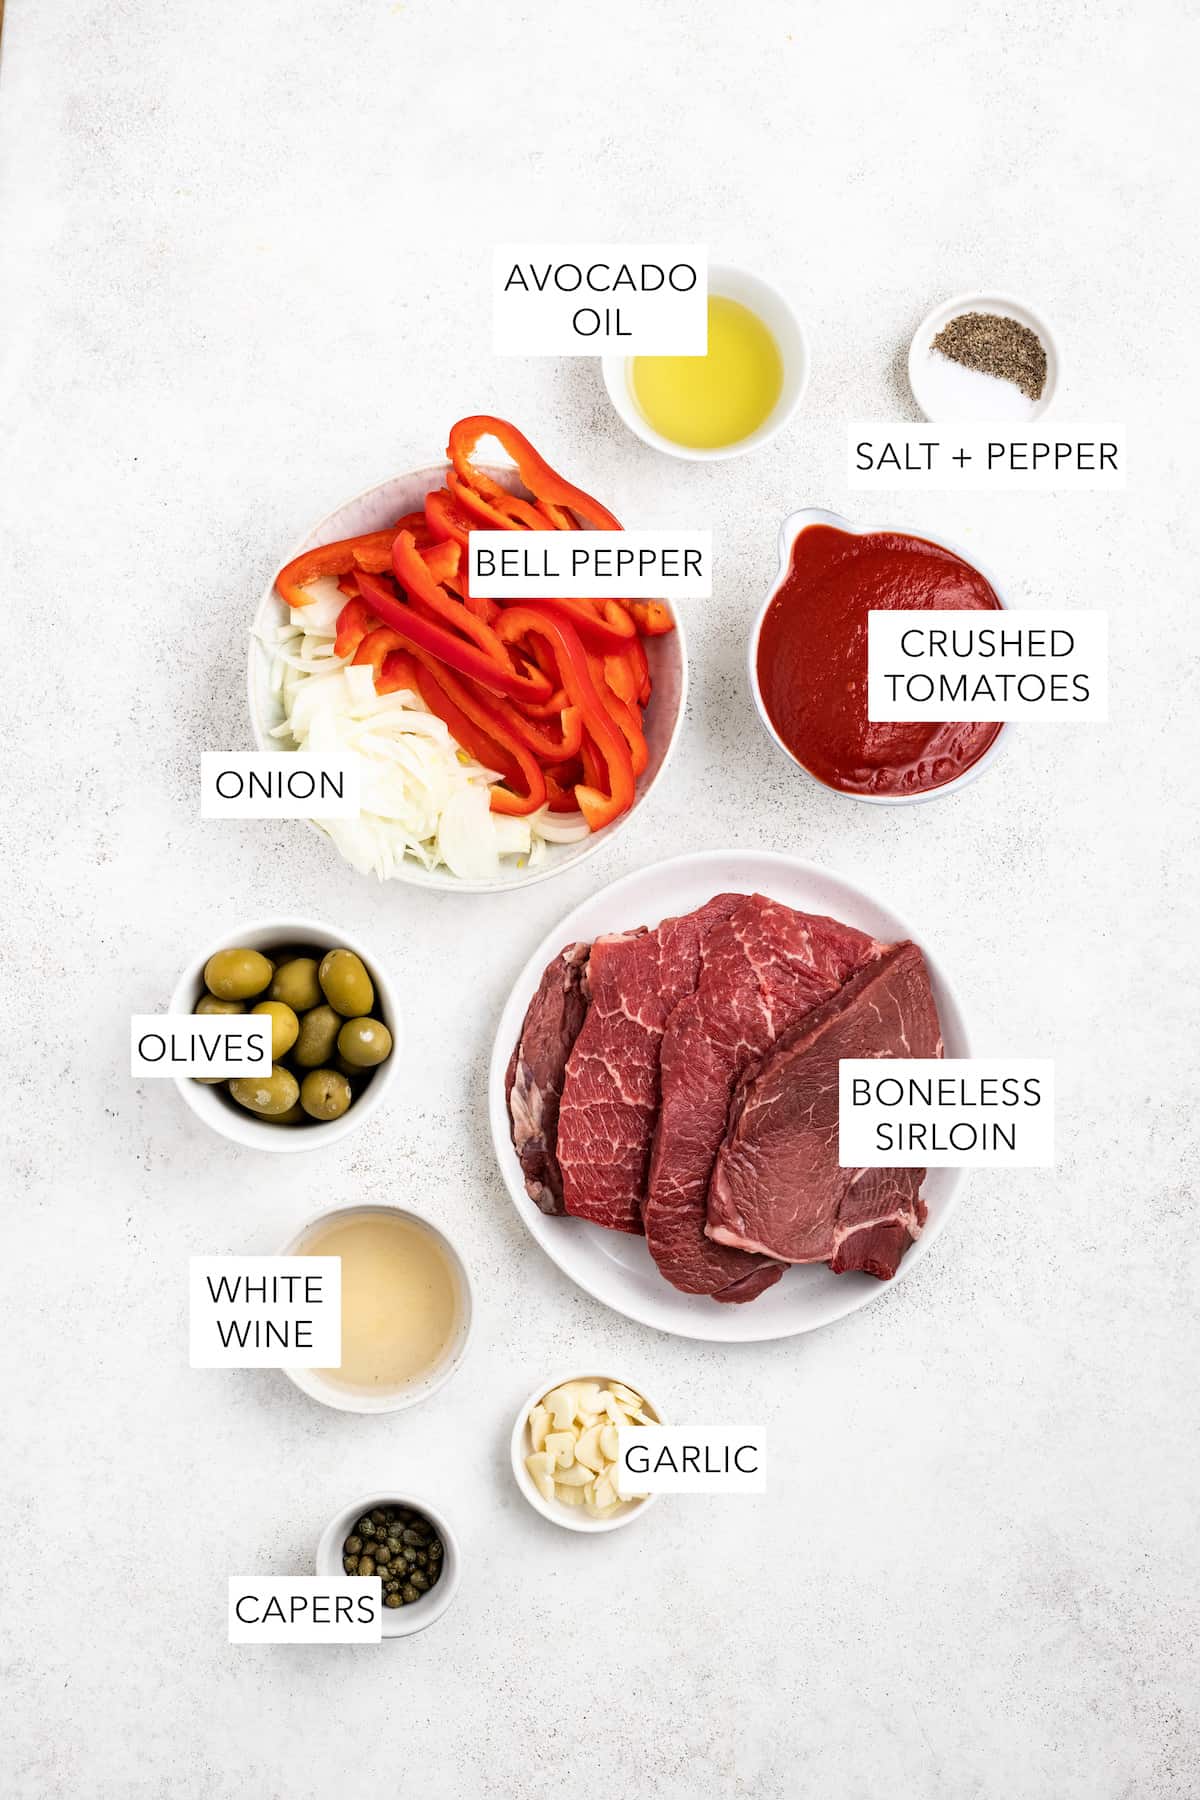 Ingredients for steak pizzaiola separted into bowls and labeled.